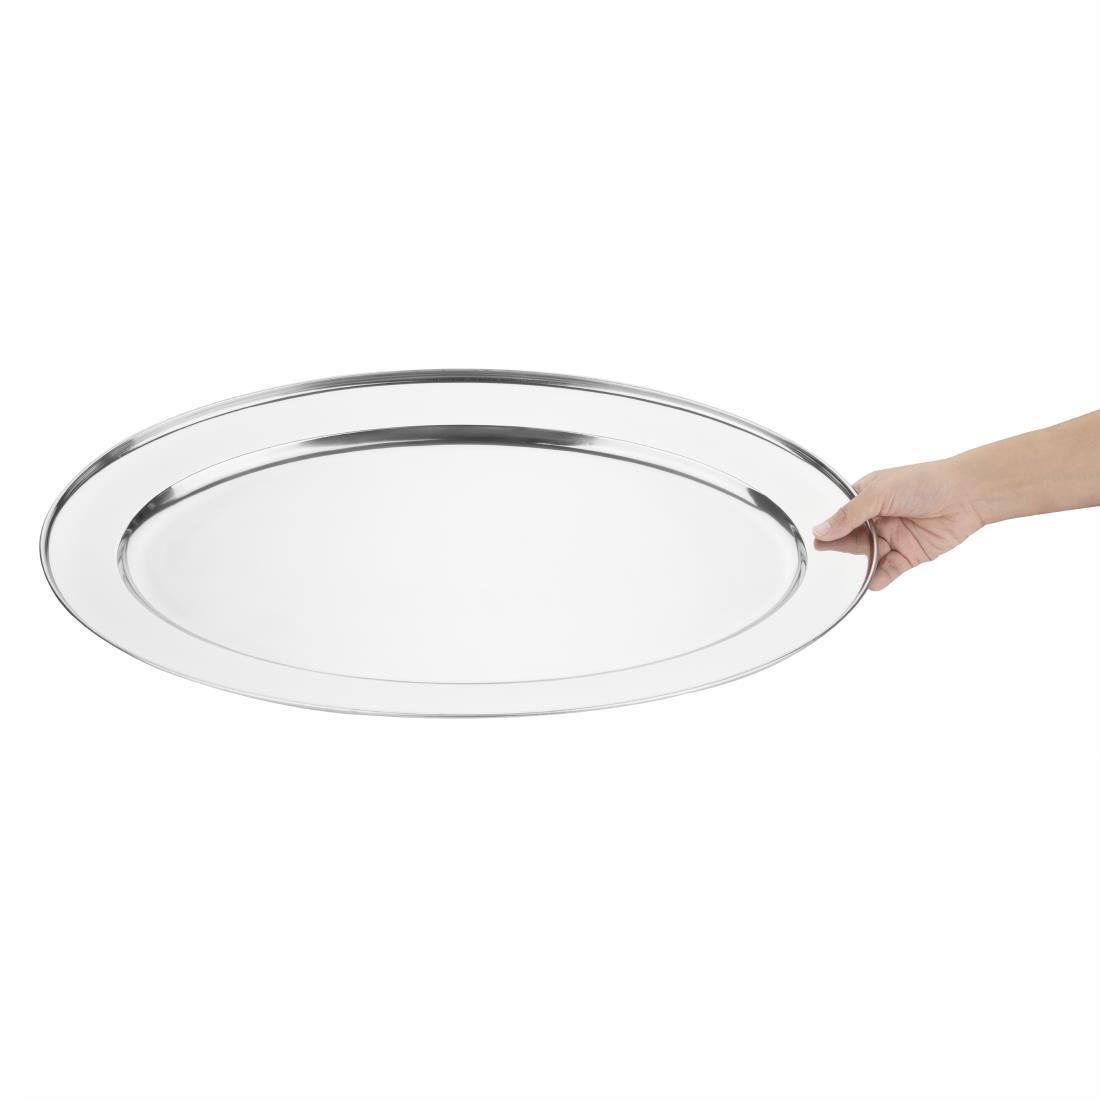 Olympia Stainless Steel Oval Serving Tray 605mm - K369  - 7